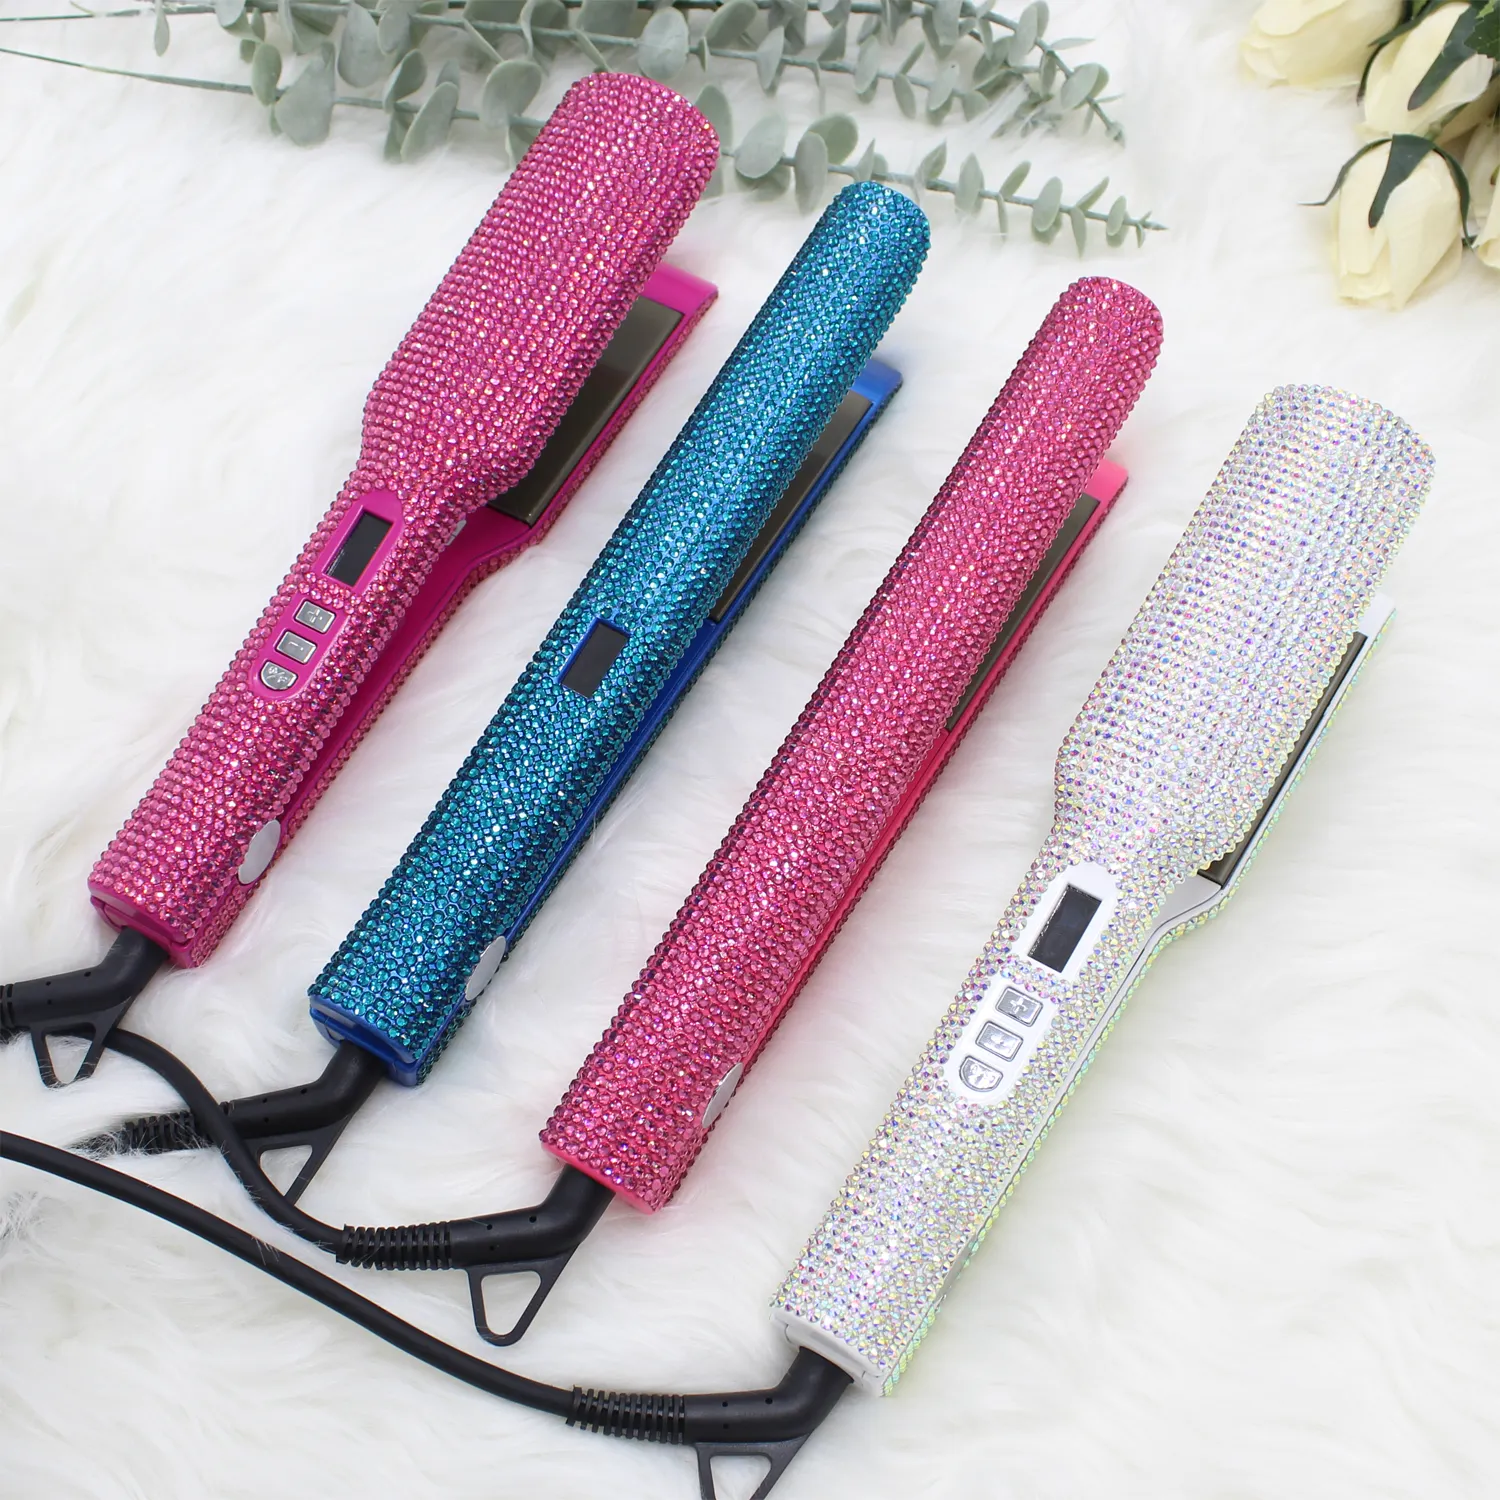 Wholesale Pink Black Rhinestone Electric 500 Degrees Hot Comb Hair Straightener Hotcomb Bling Hot Comb Electric